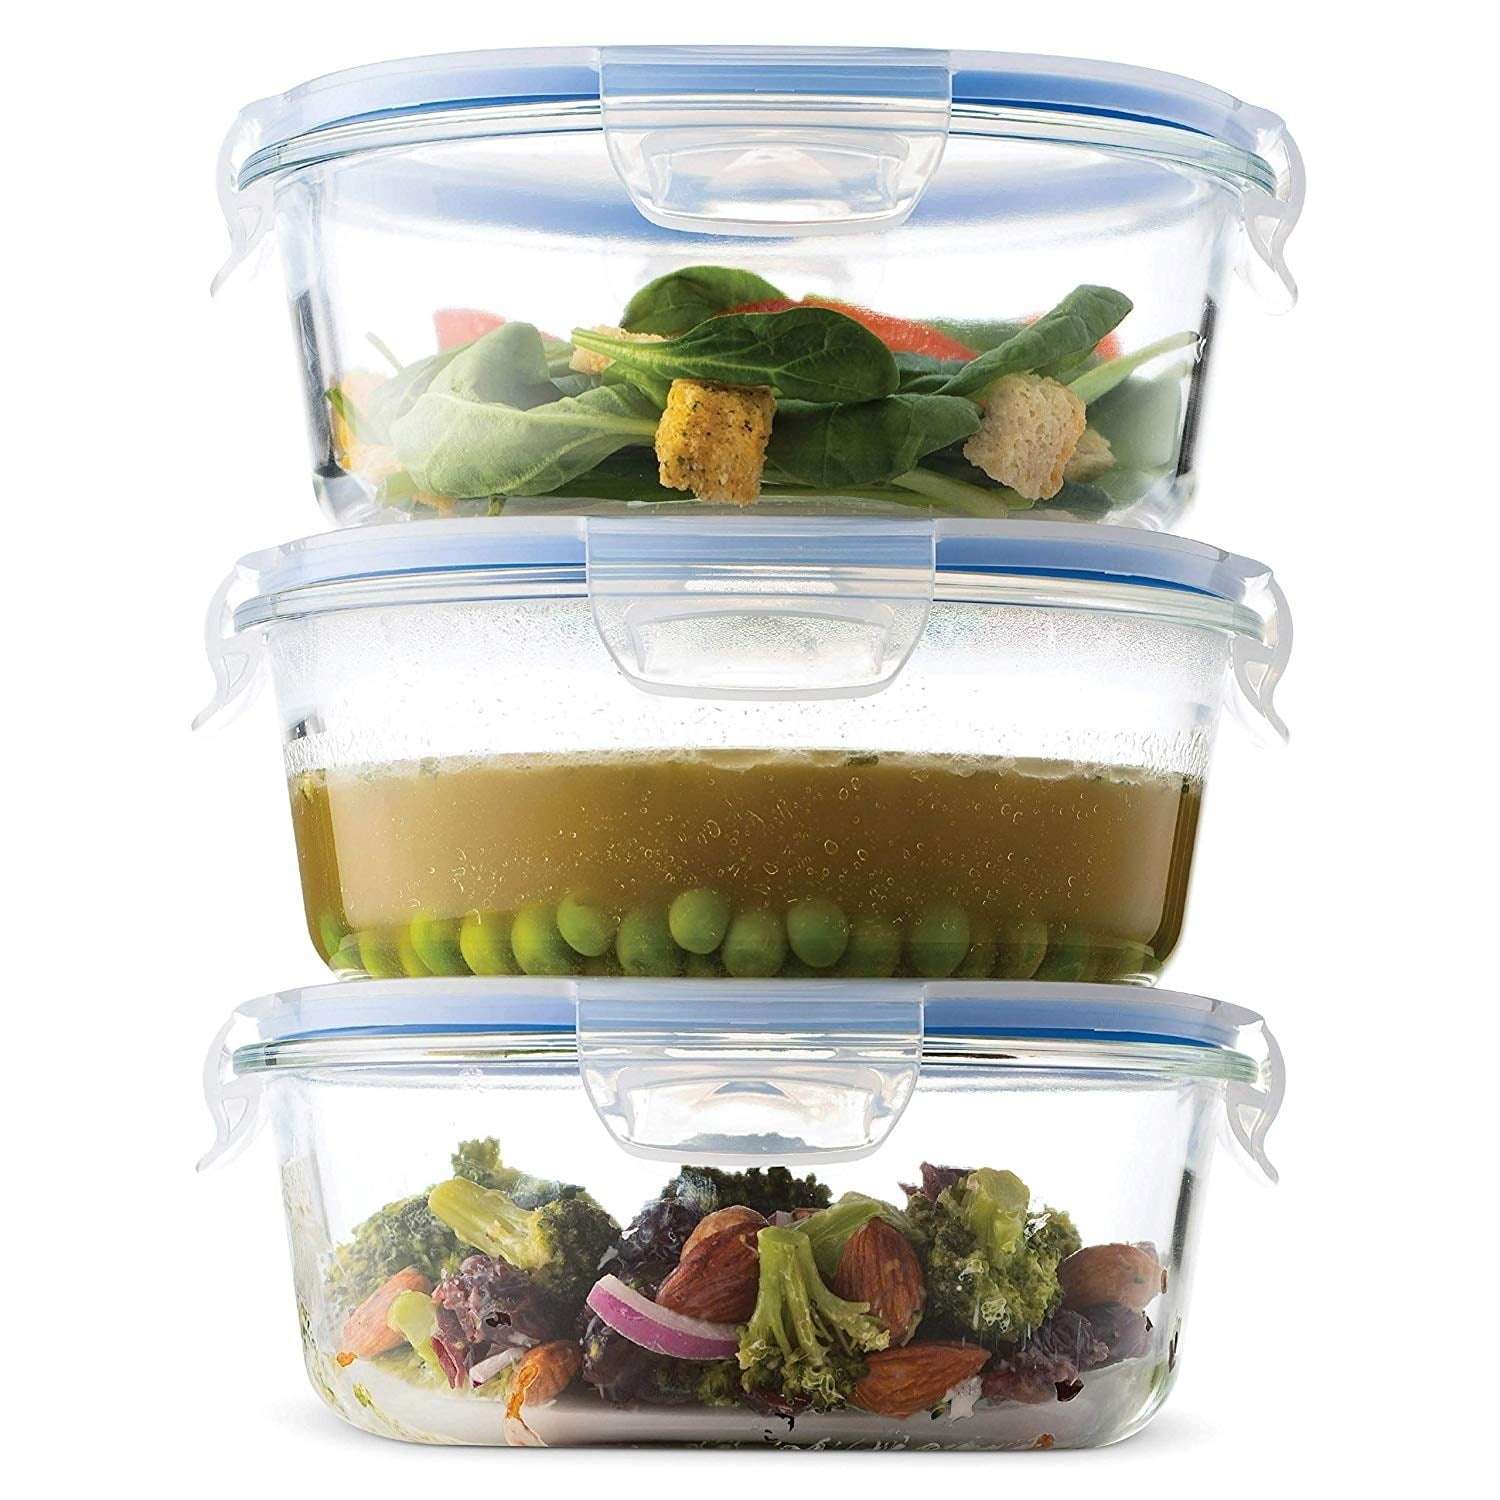 S.ROKE TTAN 3-Cup/710ml/23oz Glass Soup Container with Lids, Round Glass  Food Storage Containers Kitchen Meal Prep Bowls with Airtight Lids,  Freezer